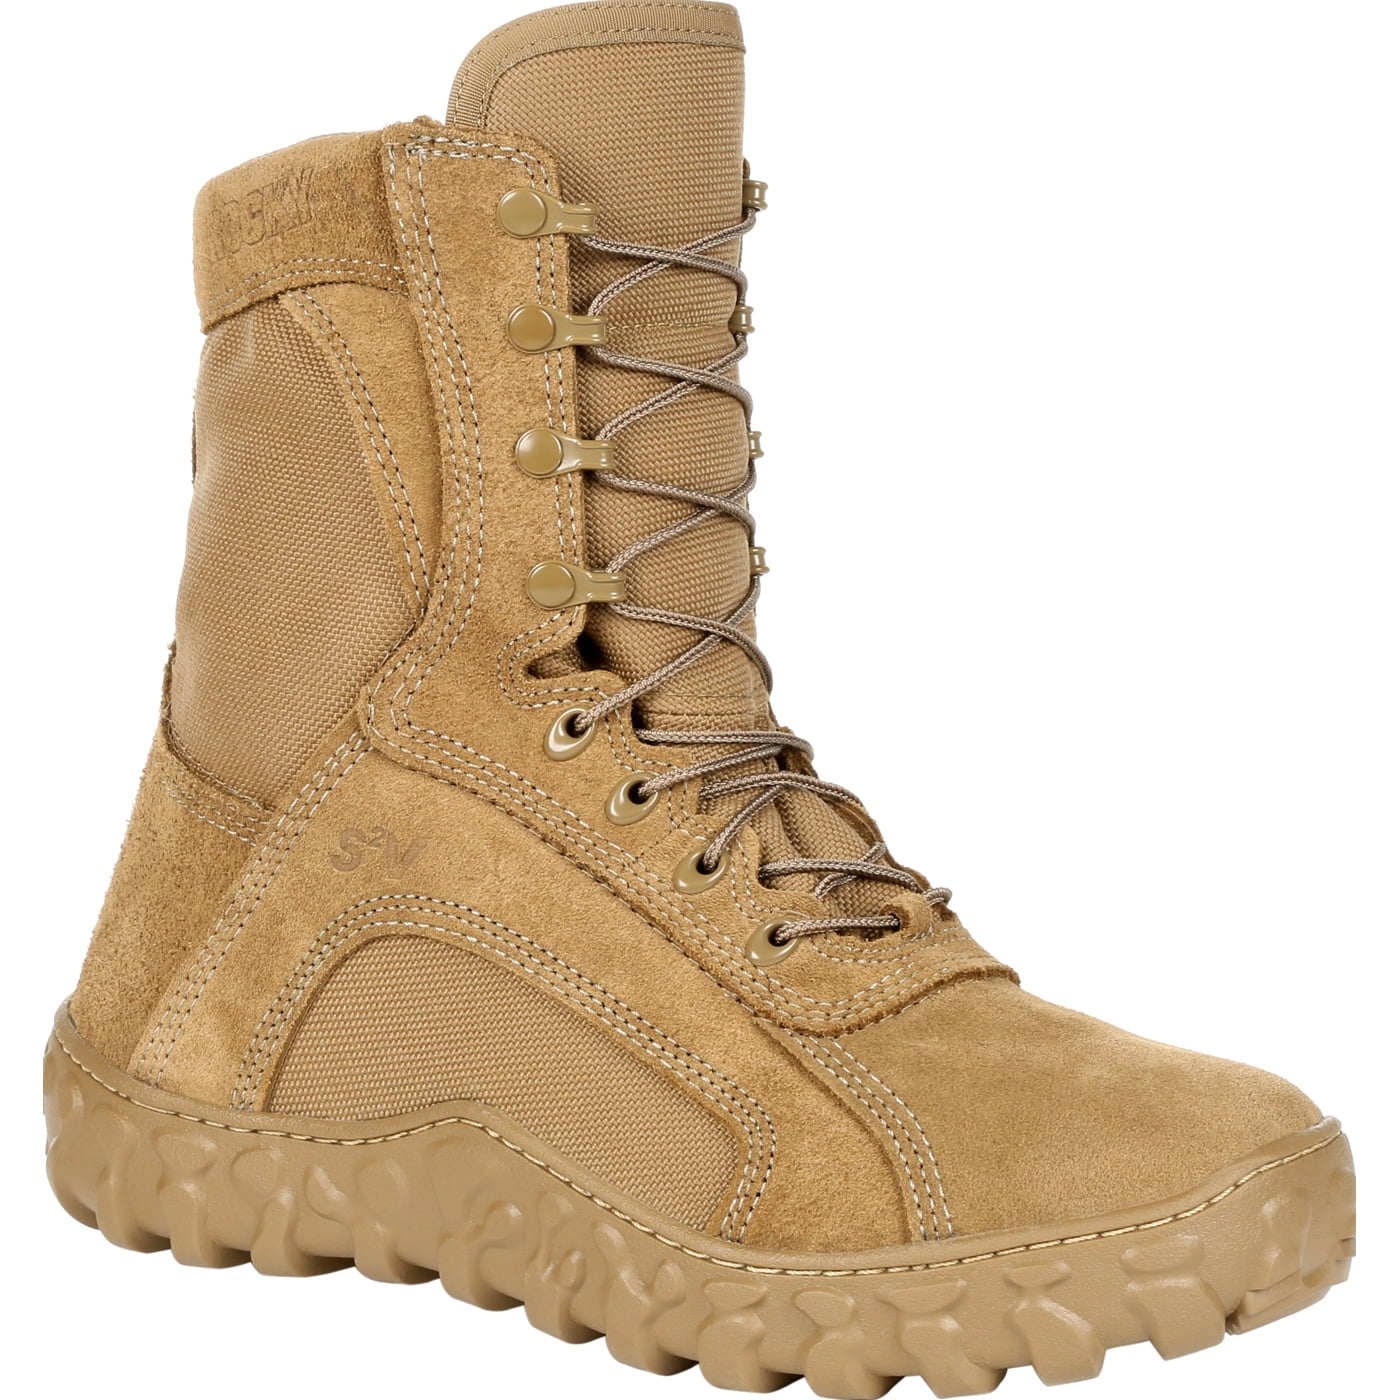 rocky men's s2v tactical leather work boots